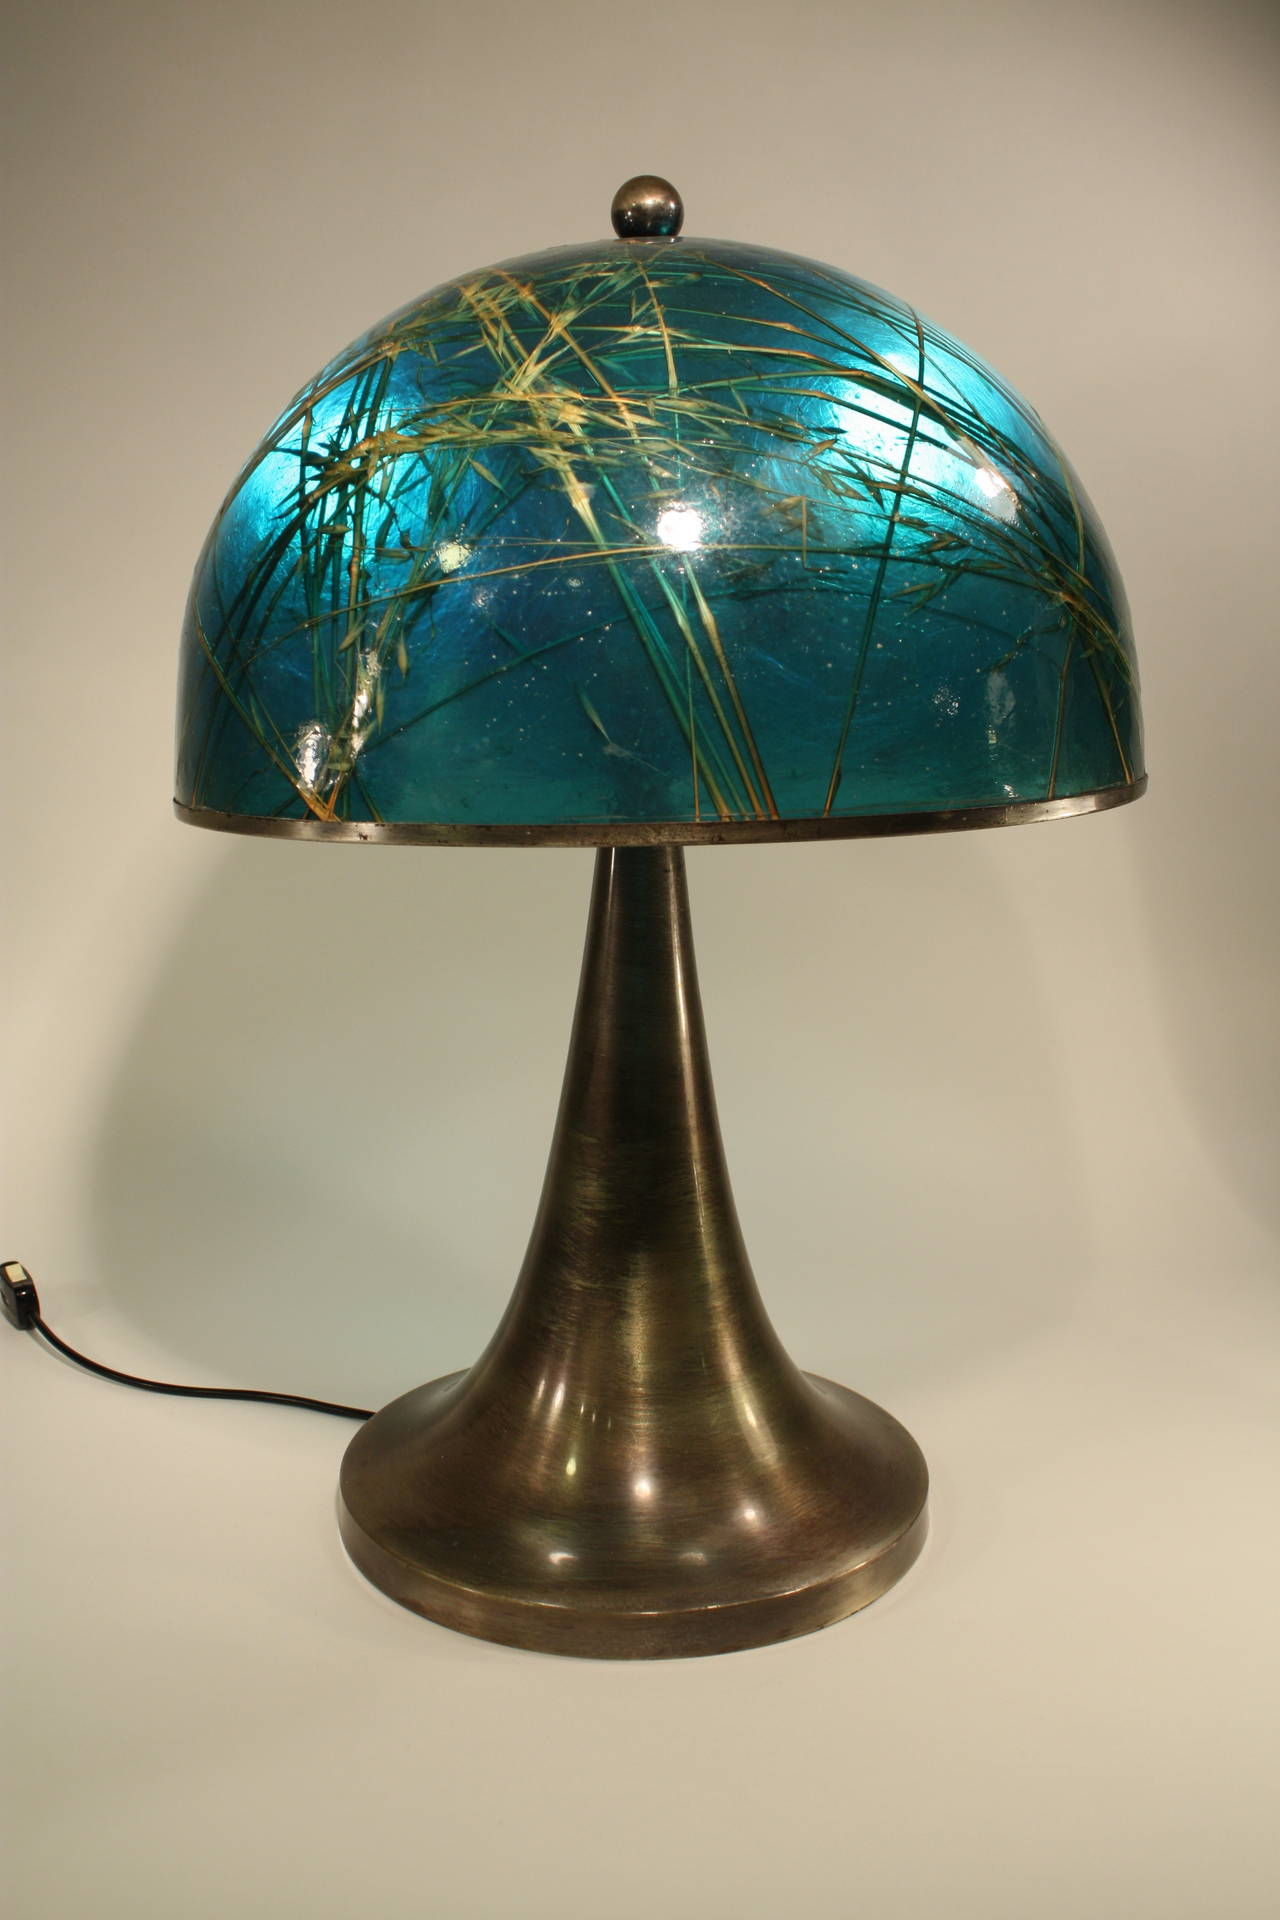 Mid-Century Modern Large Italian Aqua Green Color  Lamp in the style of Gabriela Crespi.